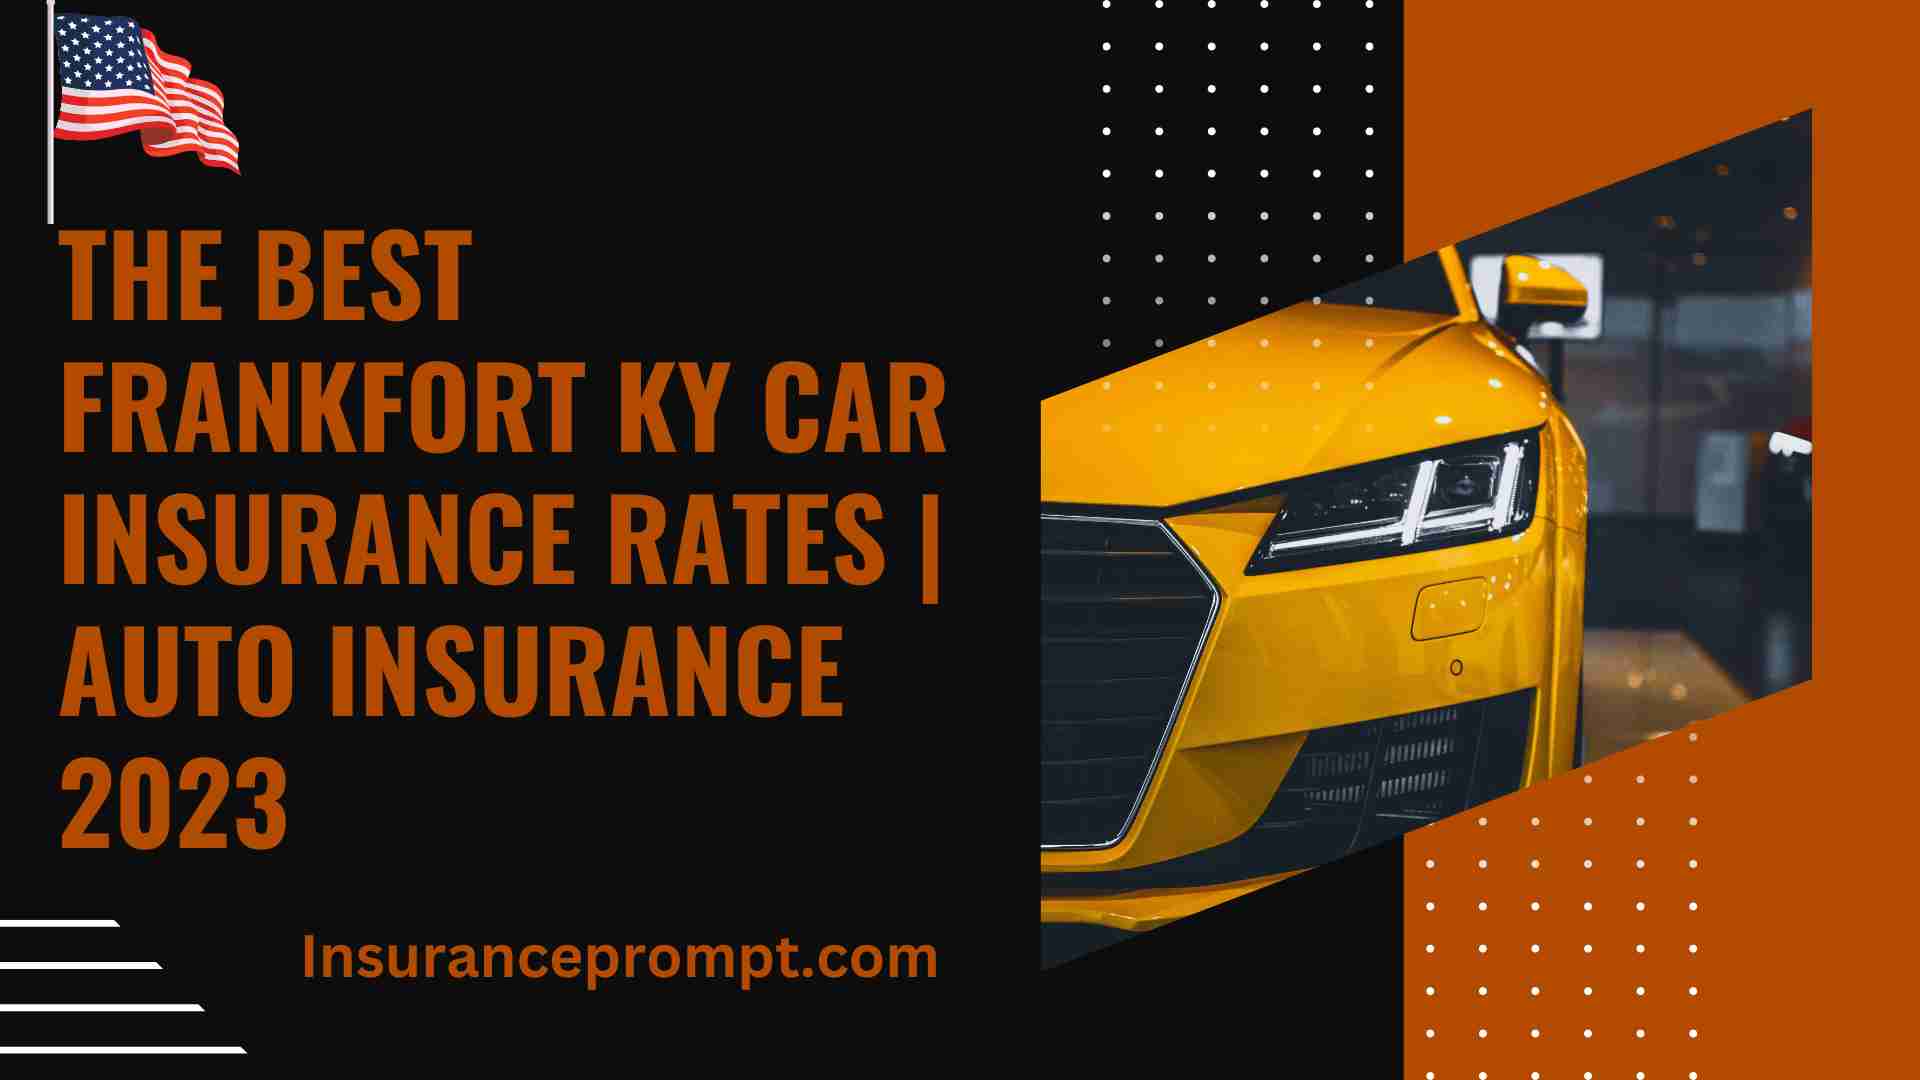 The Best Frankfort KY Car Insurance Rates Auto Insurance 2023